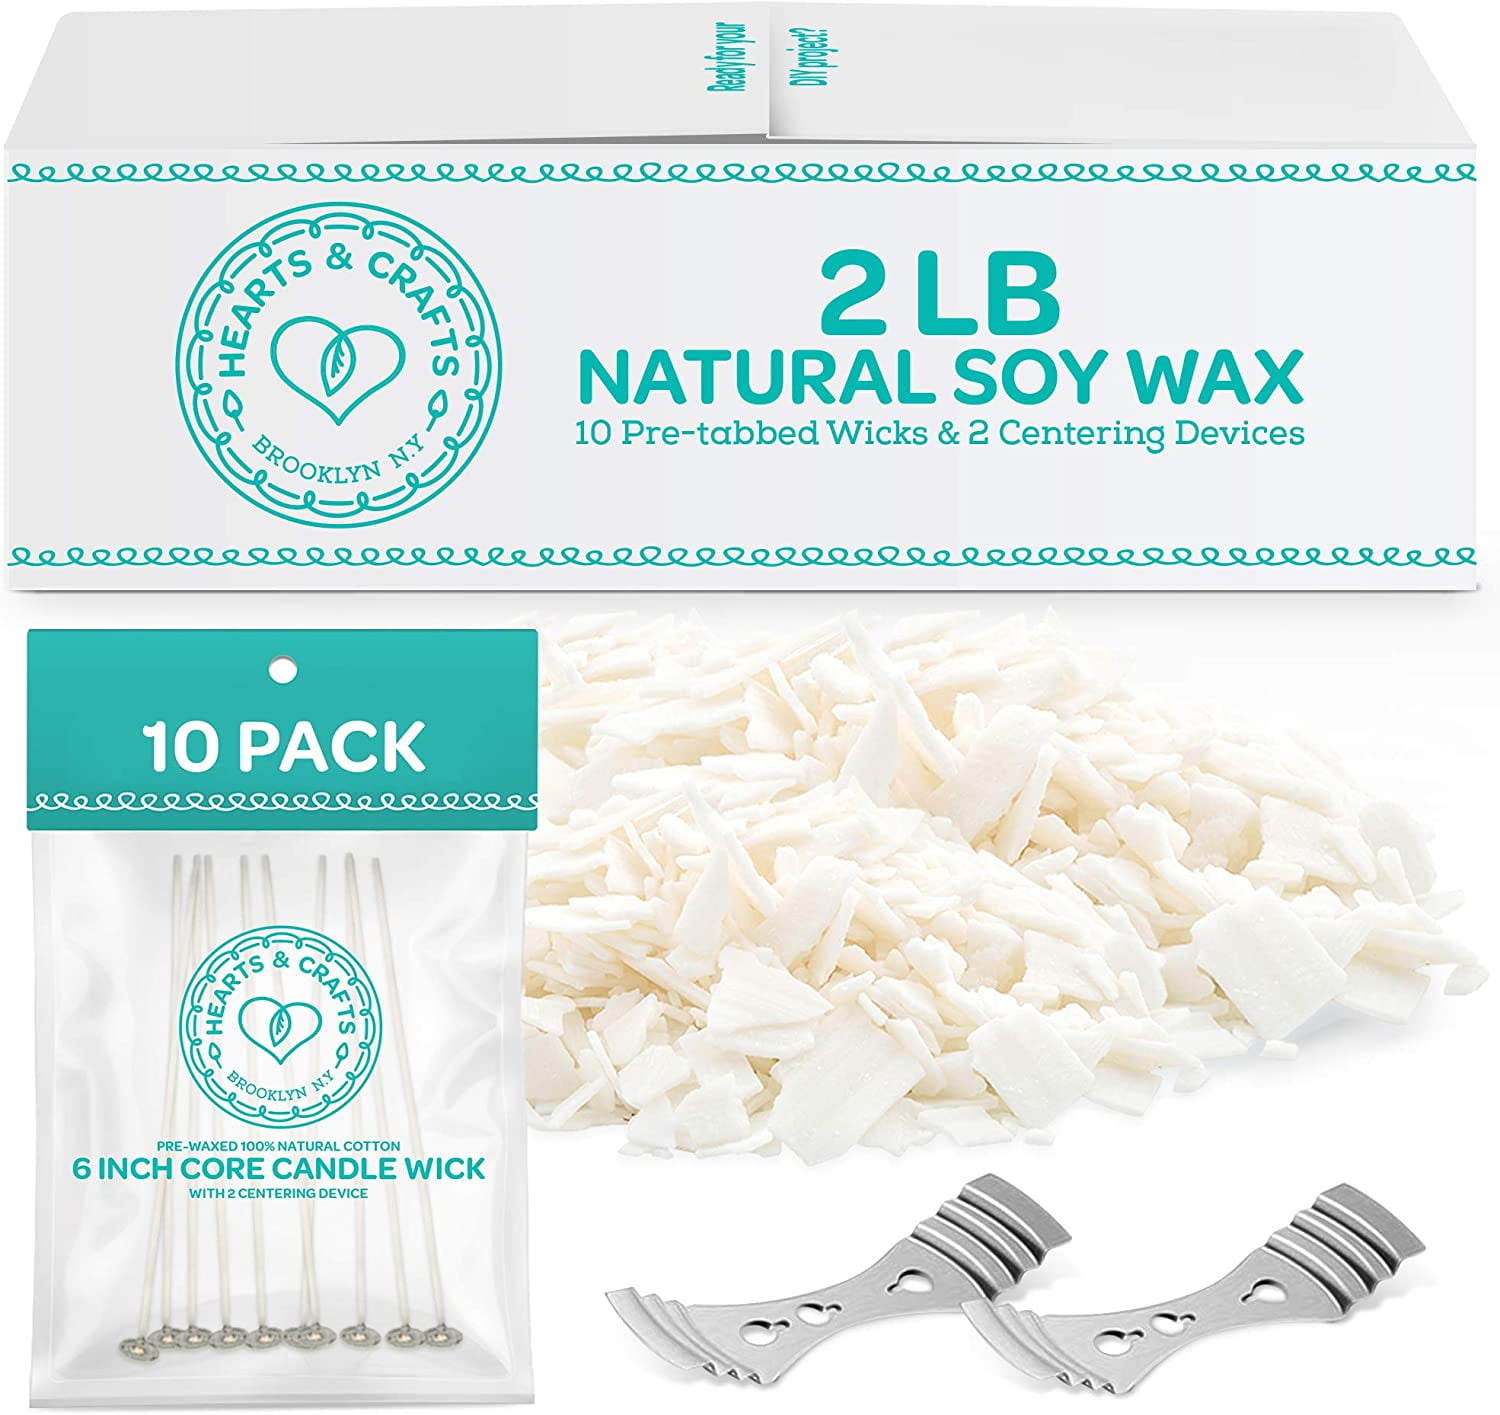 Joy Wax Candle Making Kit - Nature's Garden Candles